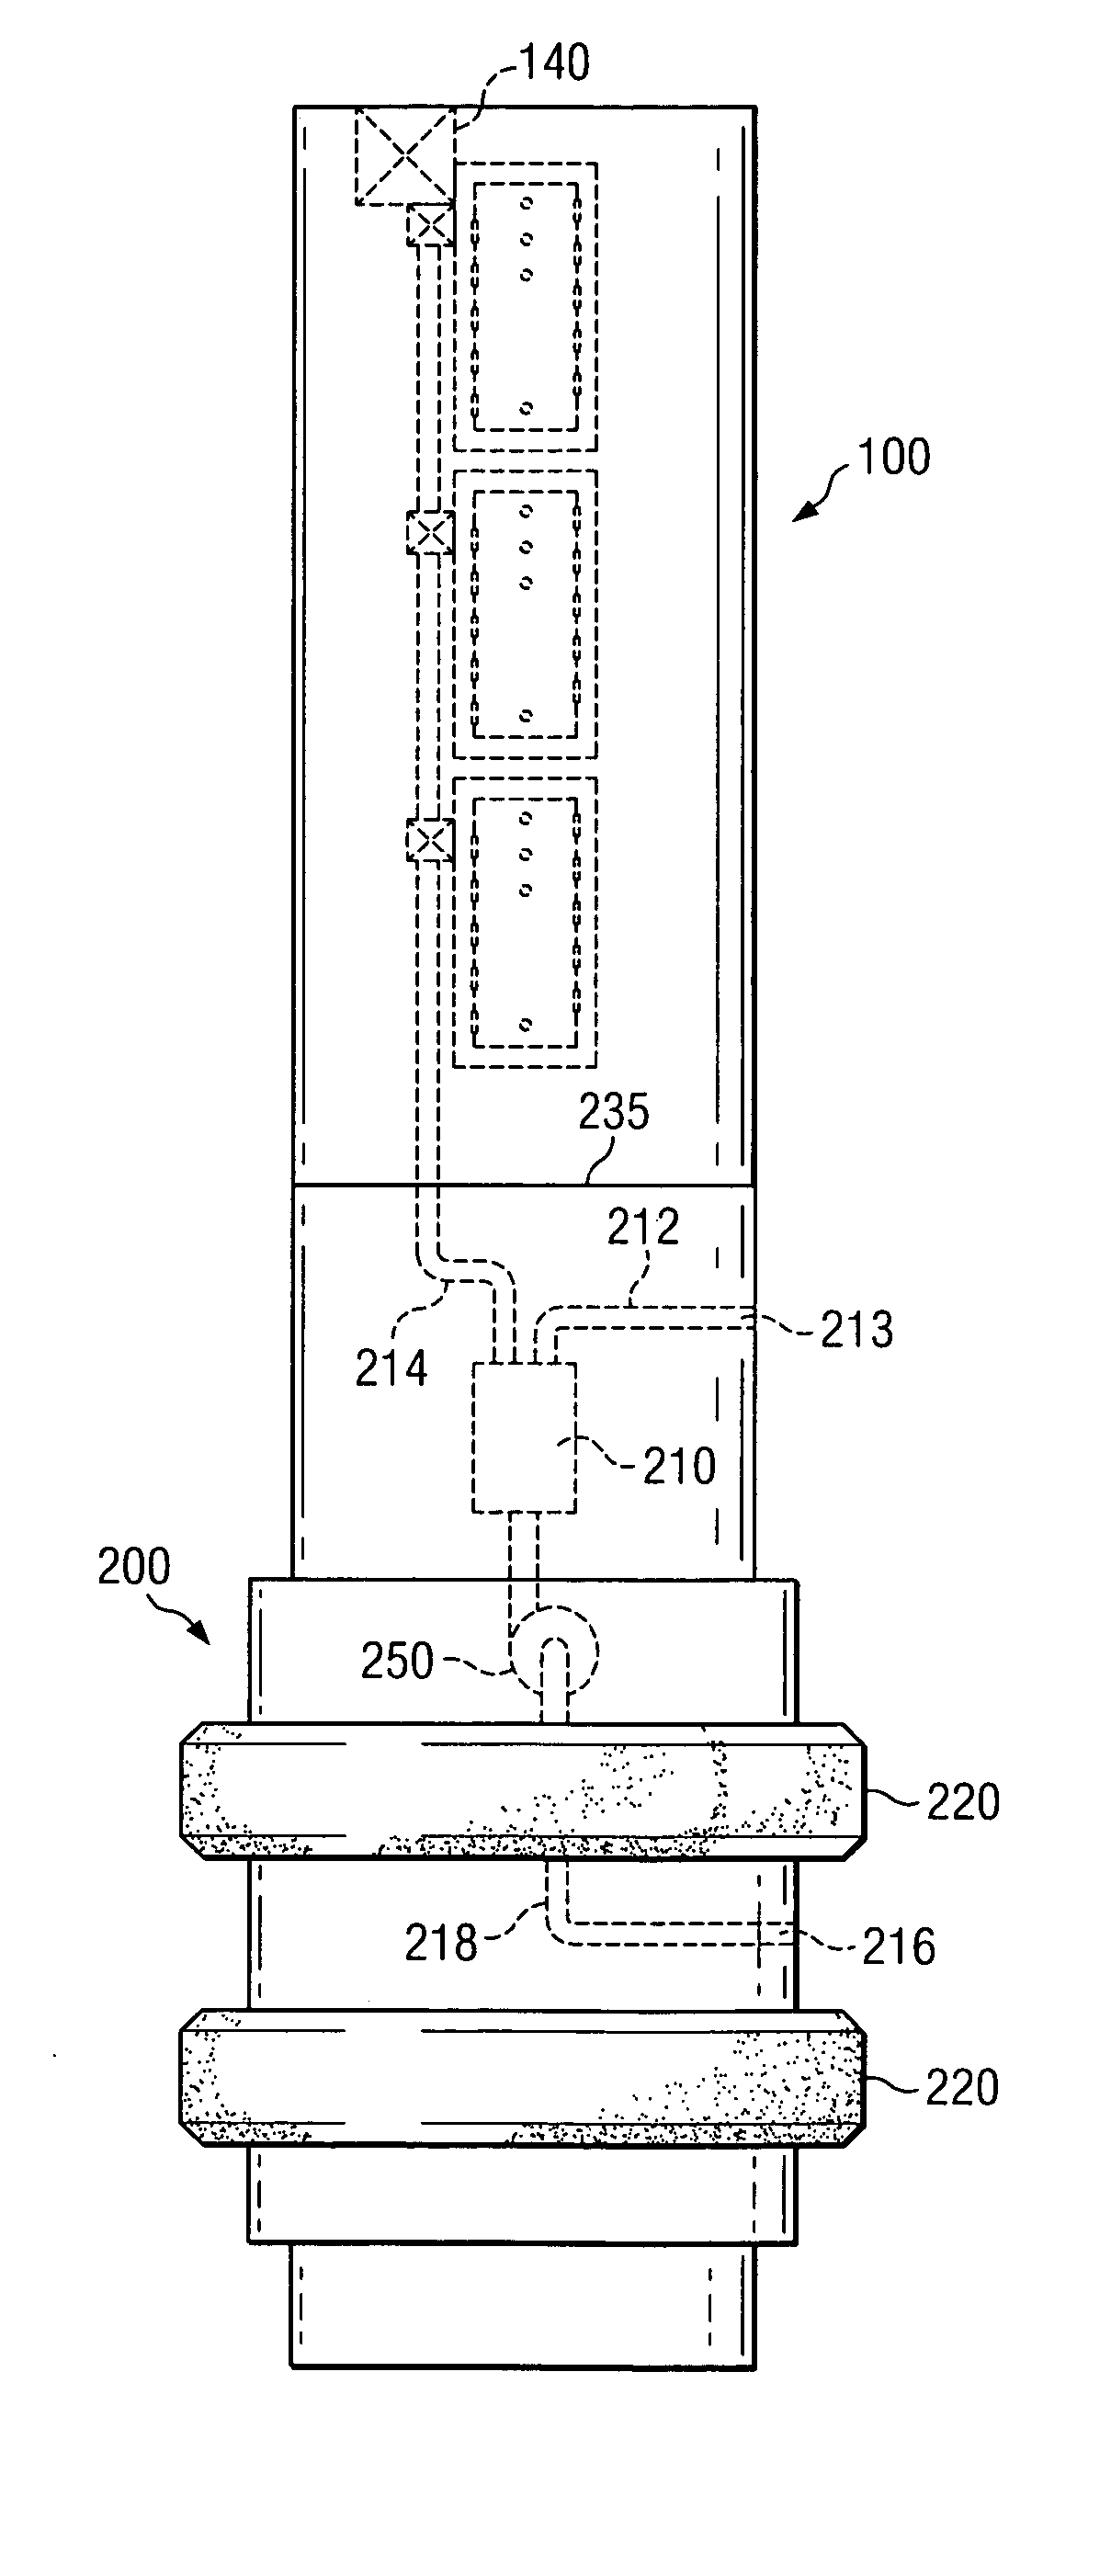 Apparatus for obtaining high quality formation fluid samples